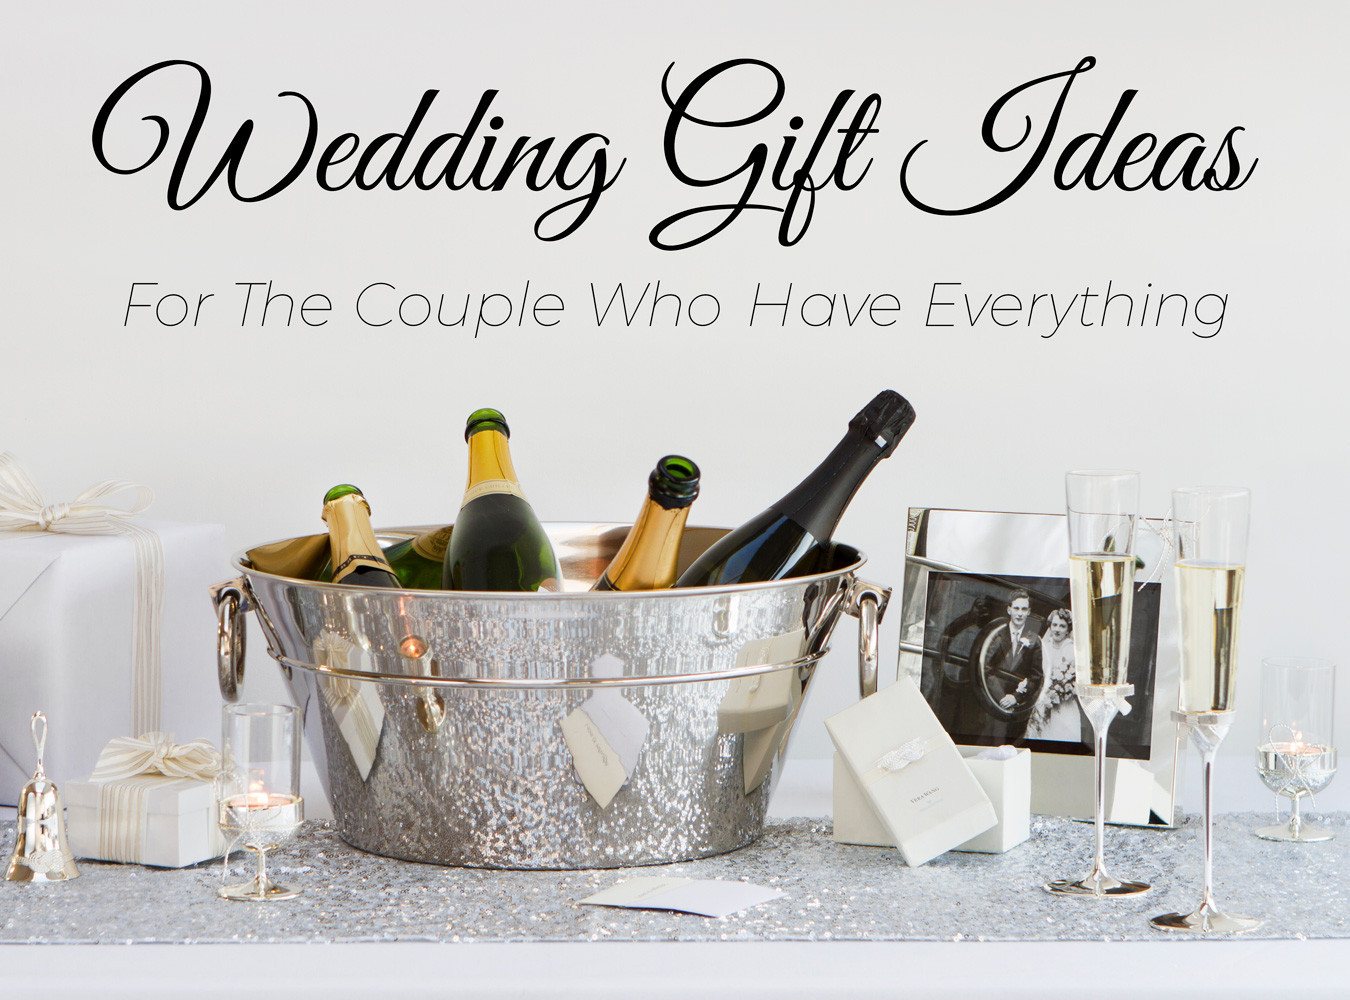 Gift Ideas For Young Married Couples
 The Best Gift Ideas for Young Married Couples – Home